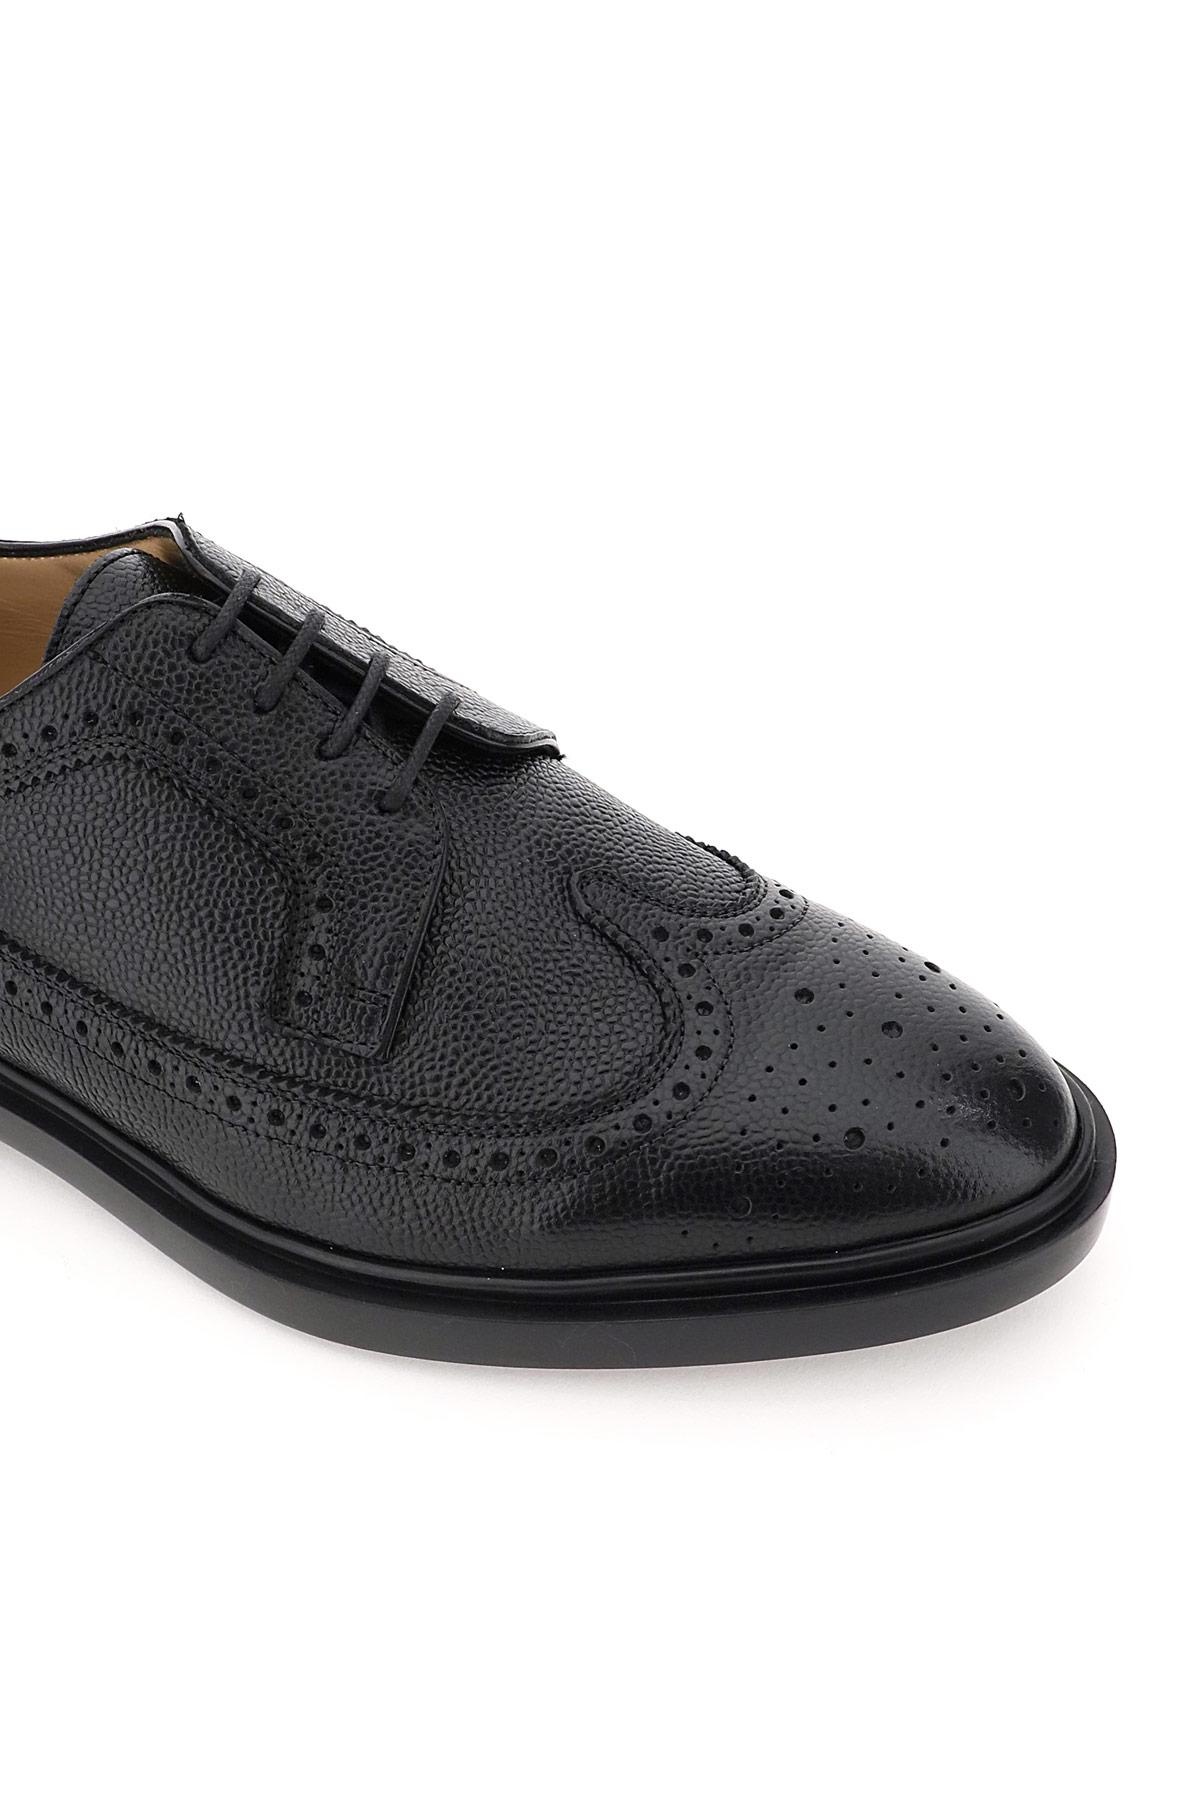 LONGWING BROGUE LACE-UP SHOES - 4